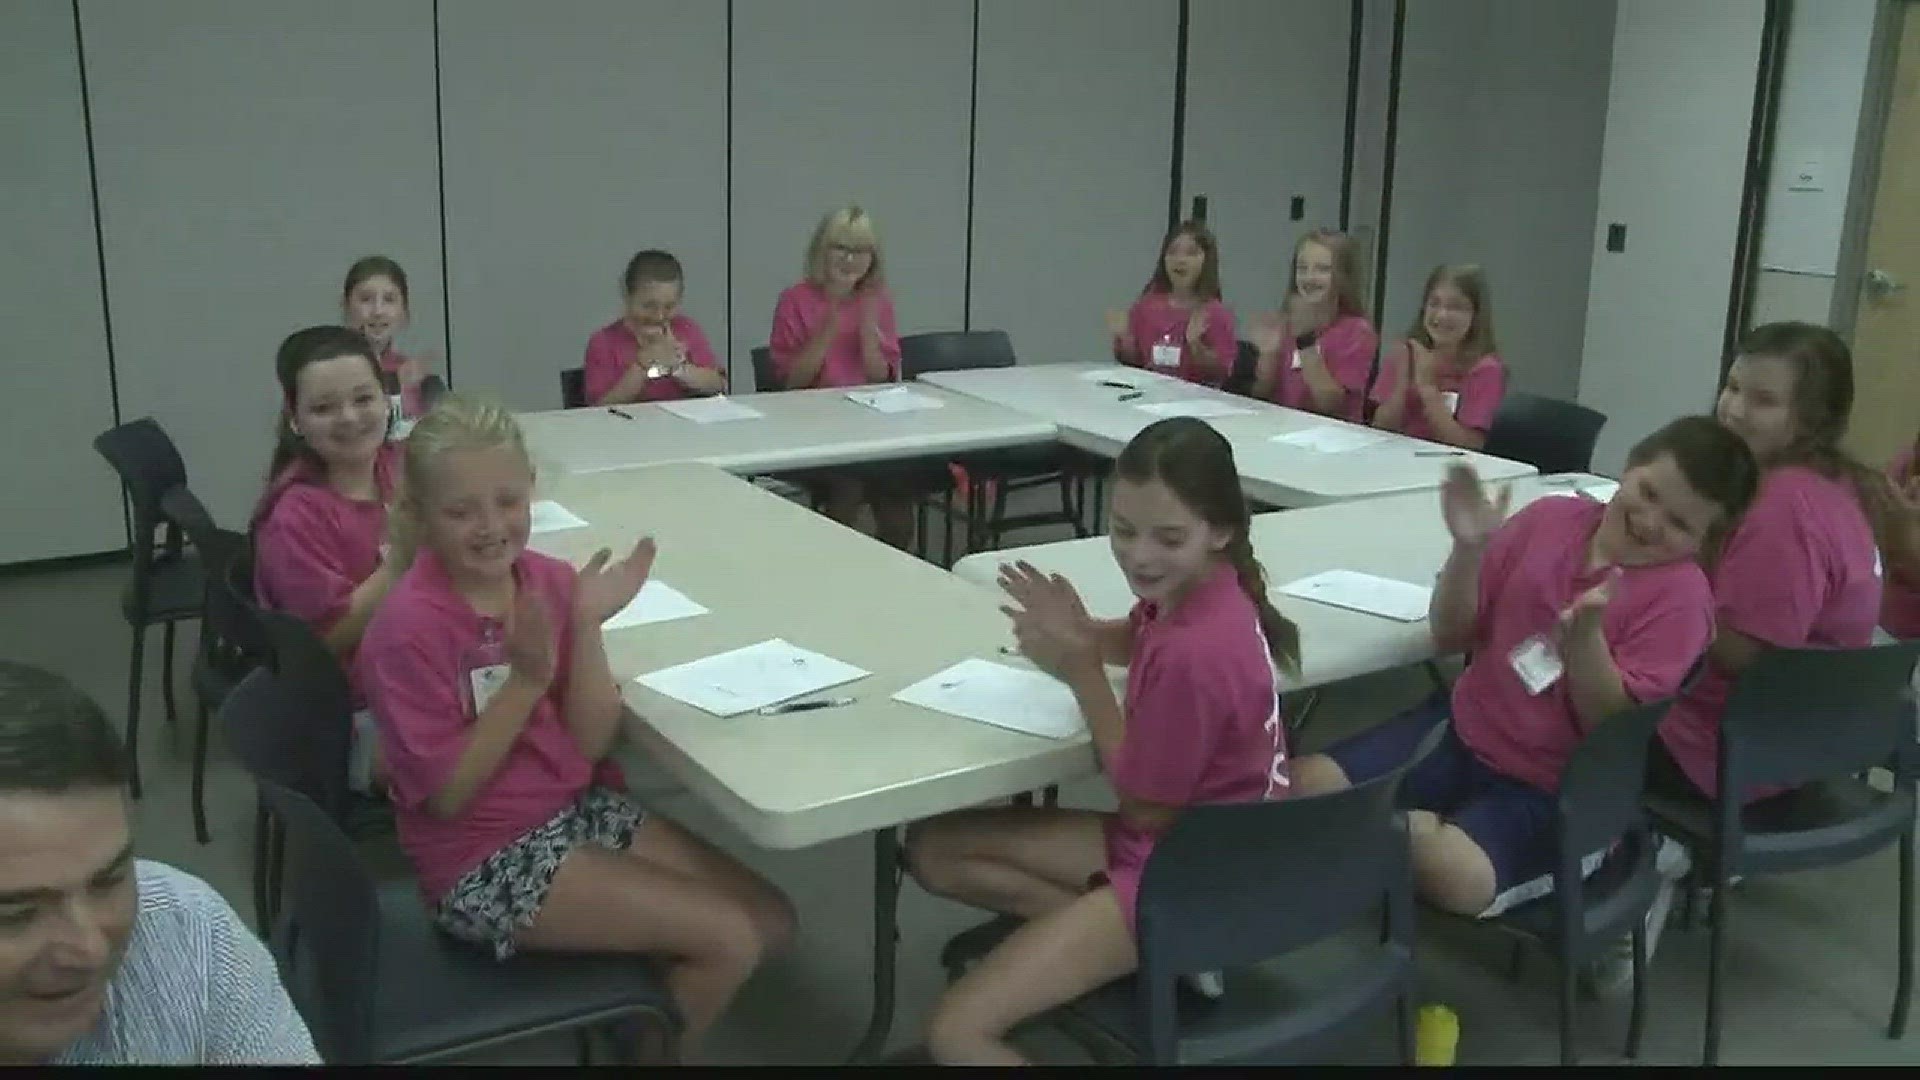 The summer camp at SPCA teaches kids how to promote pets and find them new "furever" homes!